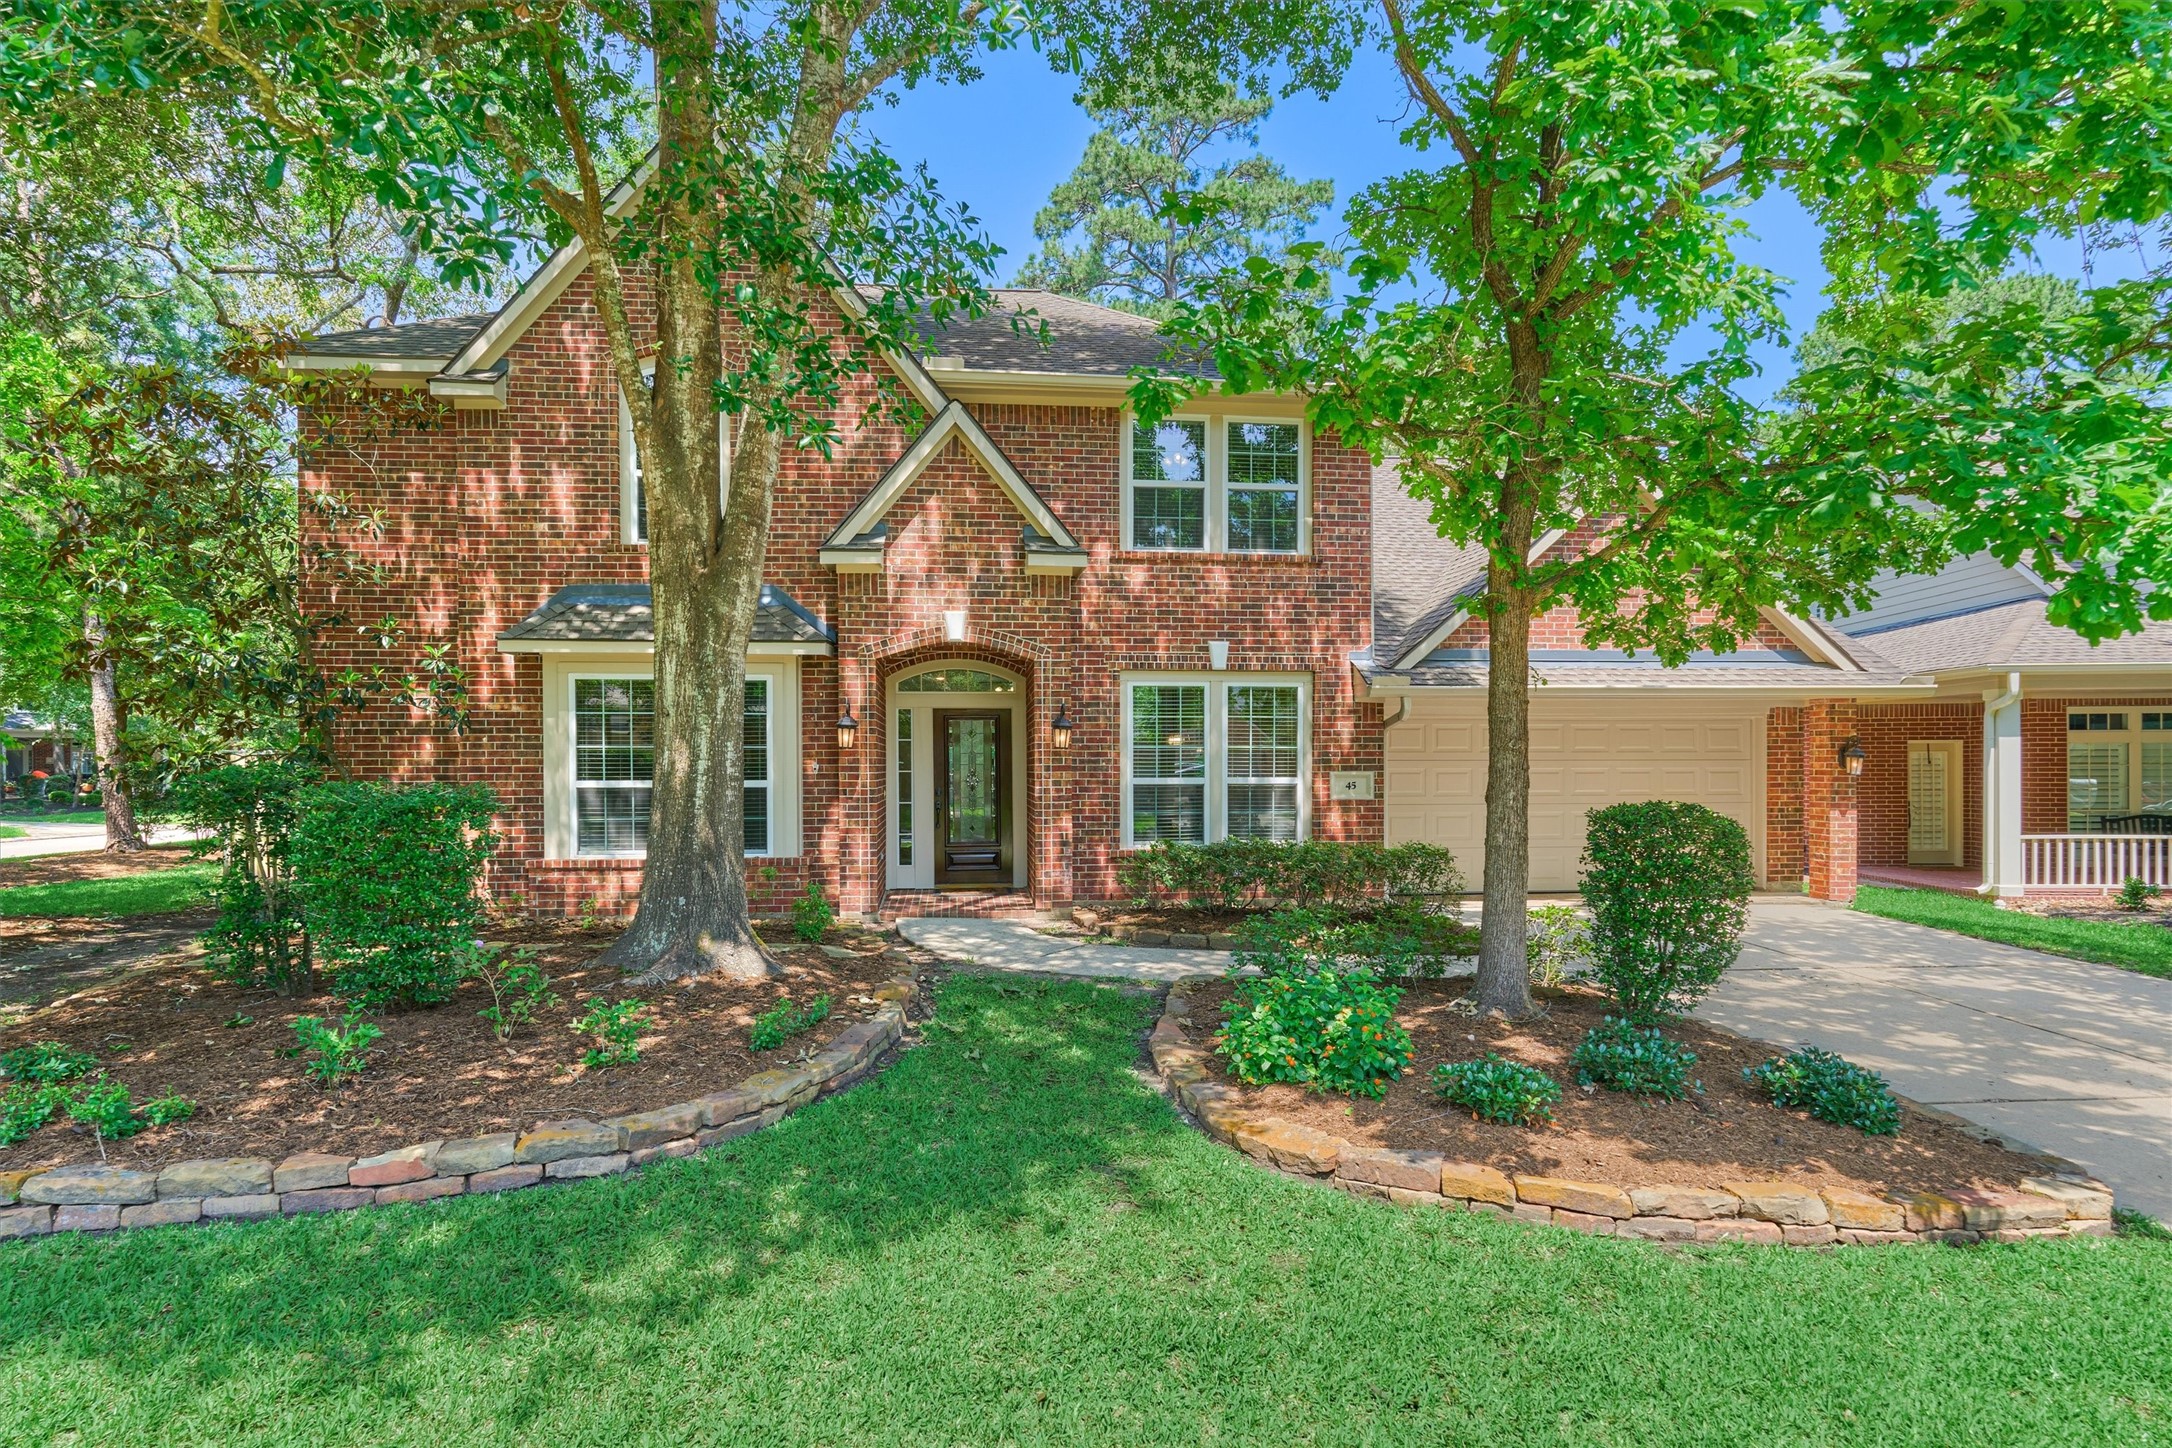 The Woodlands 2-story, 5-bed 45 N Greenvine Circle-idx